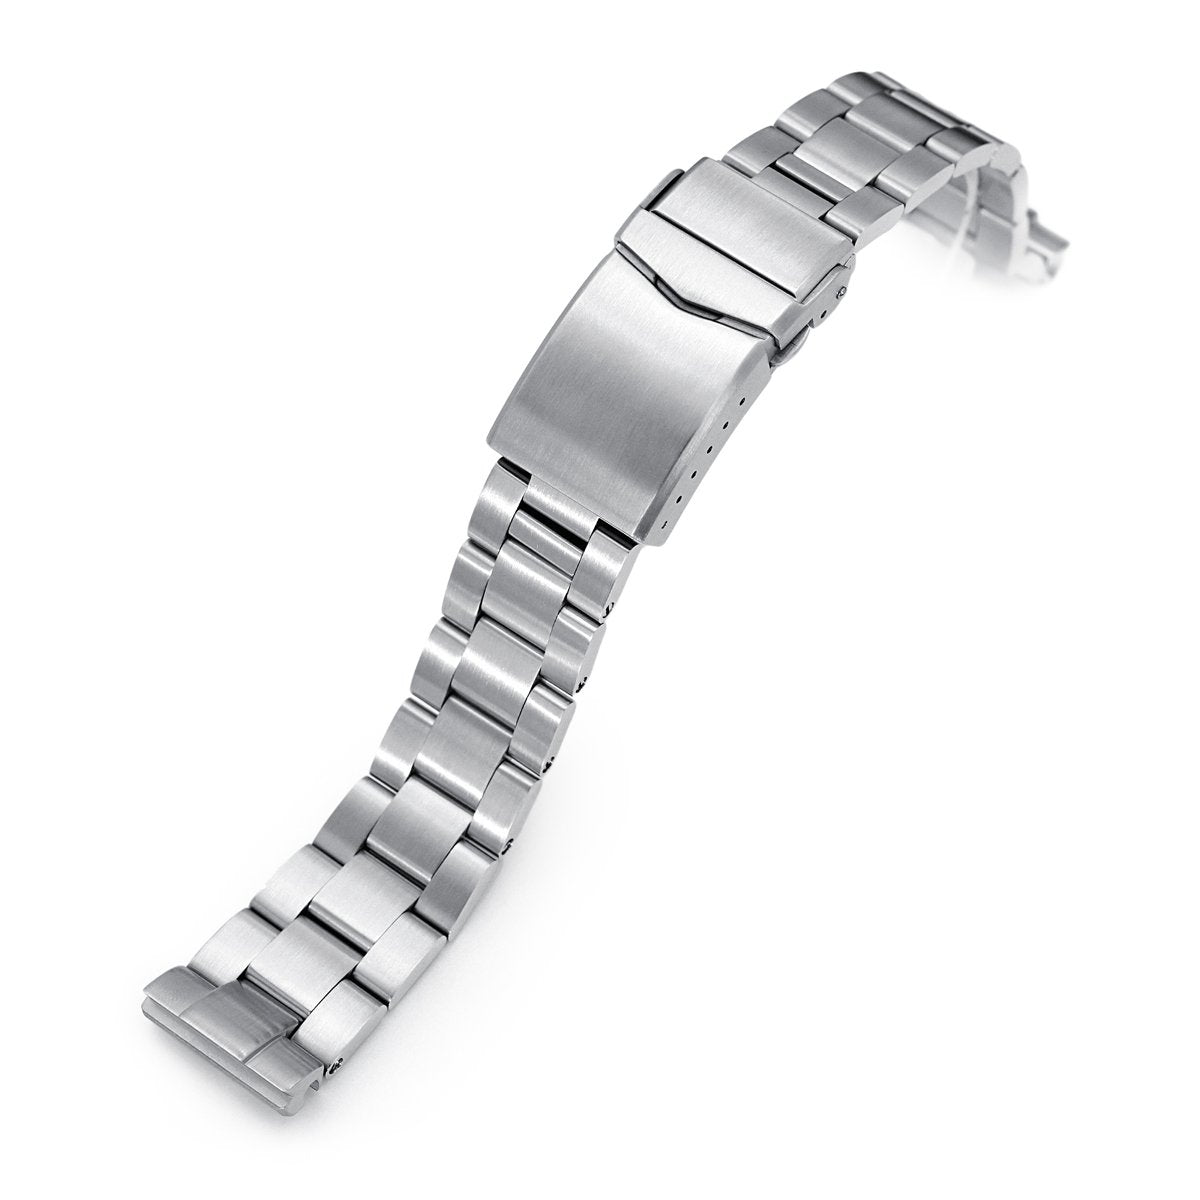 20mm Super-O Boyer 316L Stainless Steel Watch Bracelet for Seiko SBDC053 aka modern 62MAS V-Clasp Brushed Strapcode Watch Bands